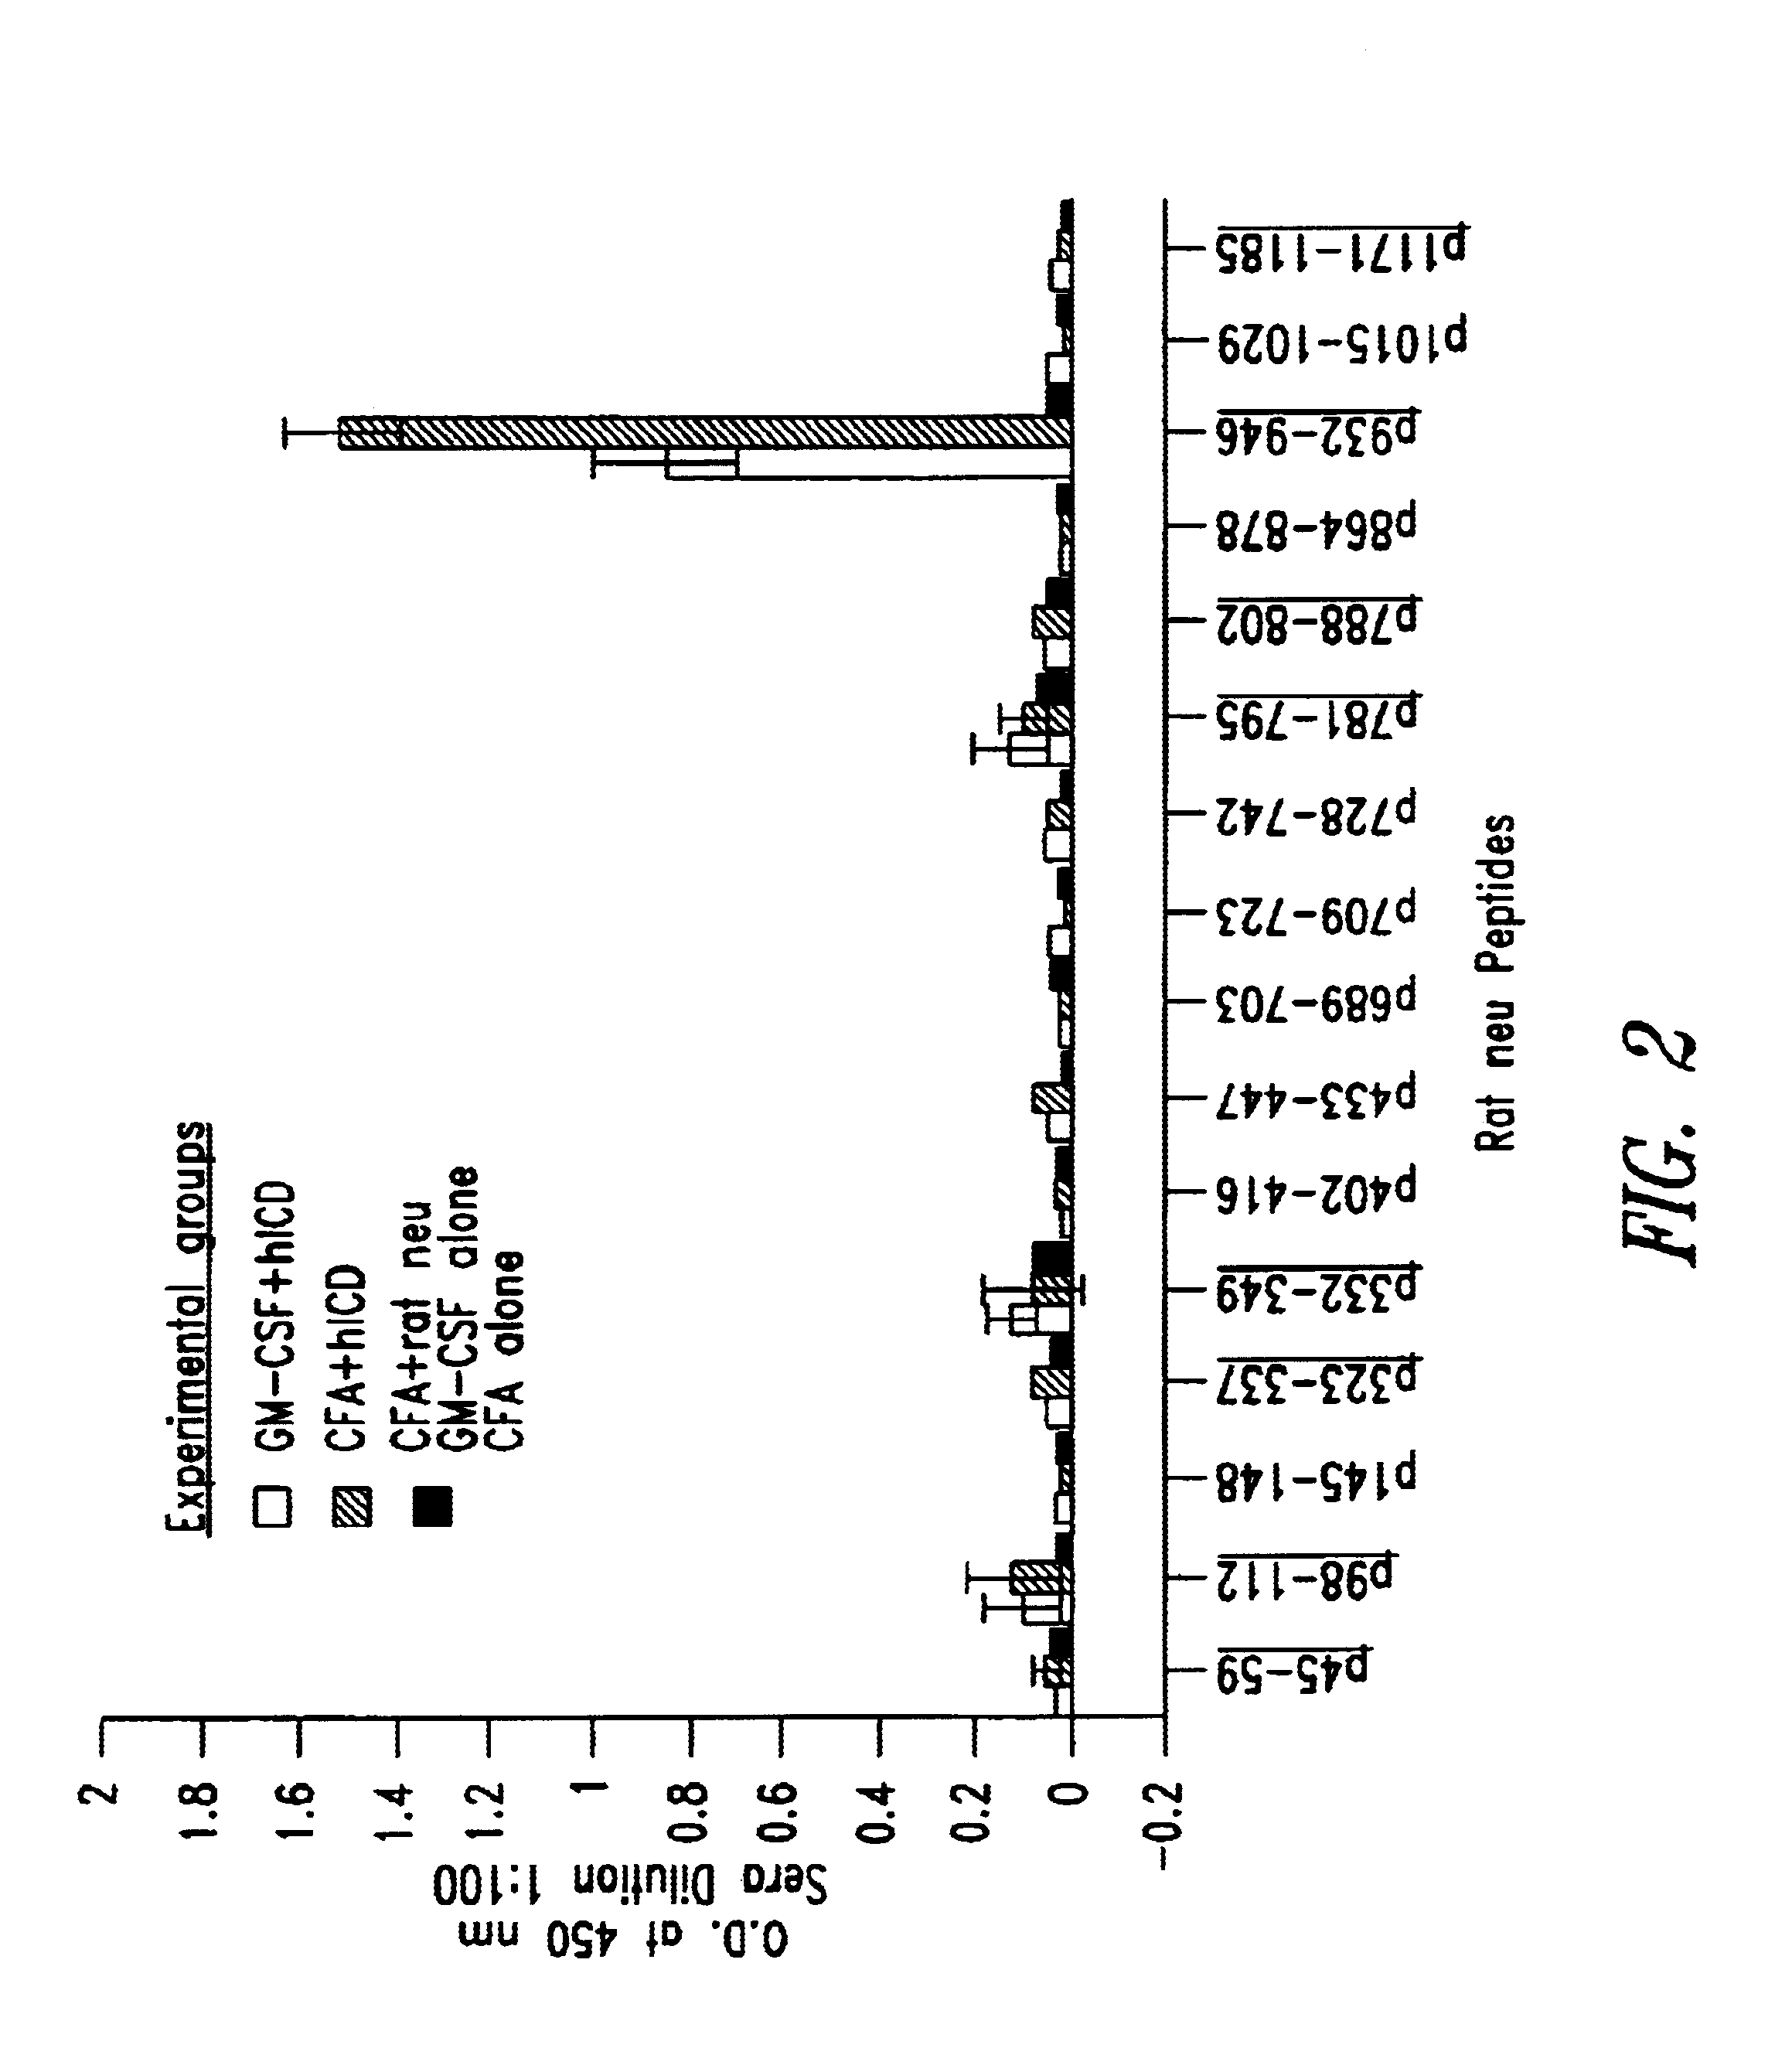 Methods and compositions to generate immunity in humans against self tumor antigens by immunization with homologous foreign proteins